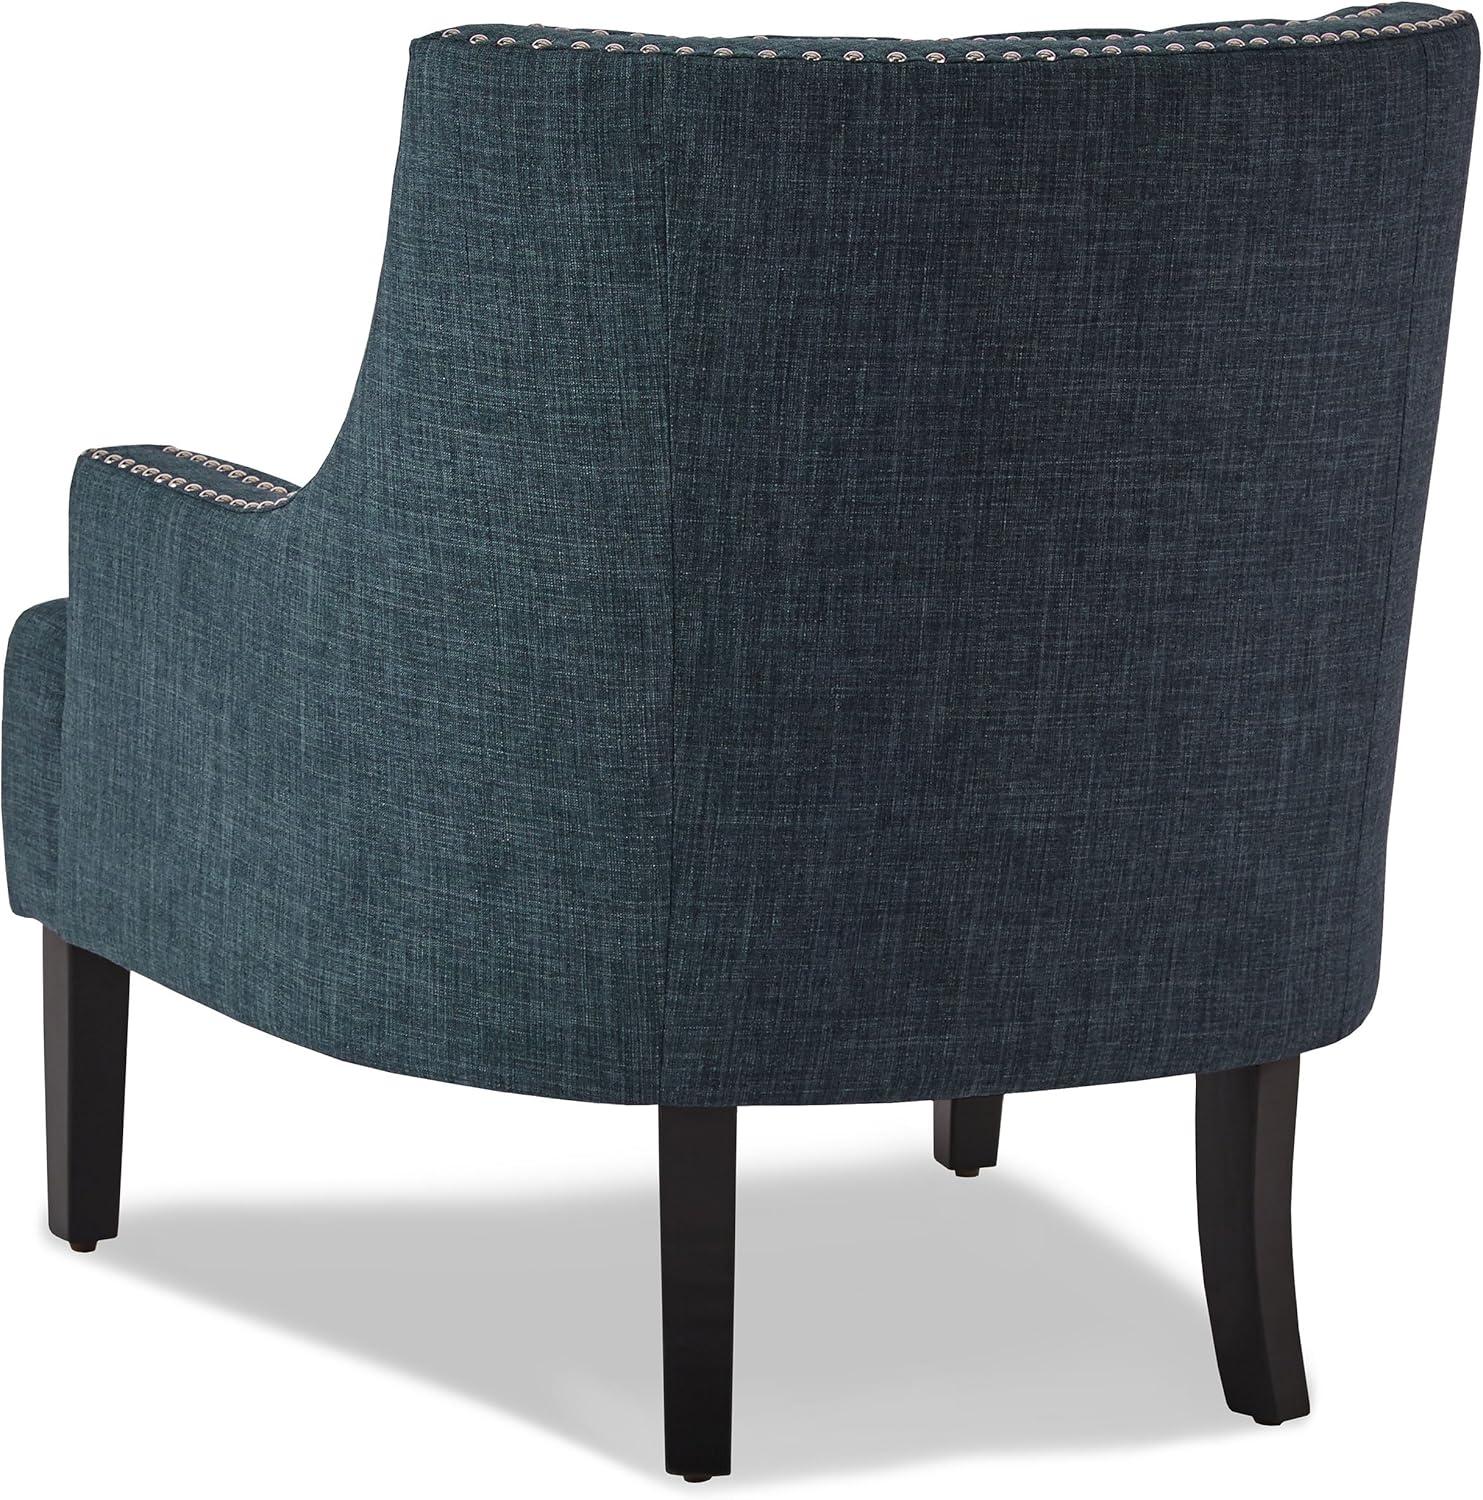 Indigo Transitional Accent Chair with Nailhead Trim and Tufted Back